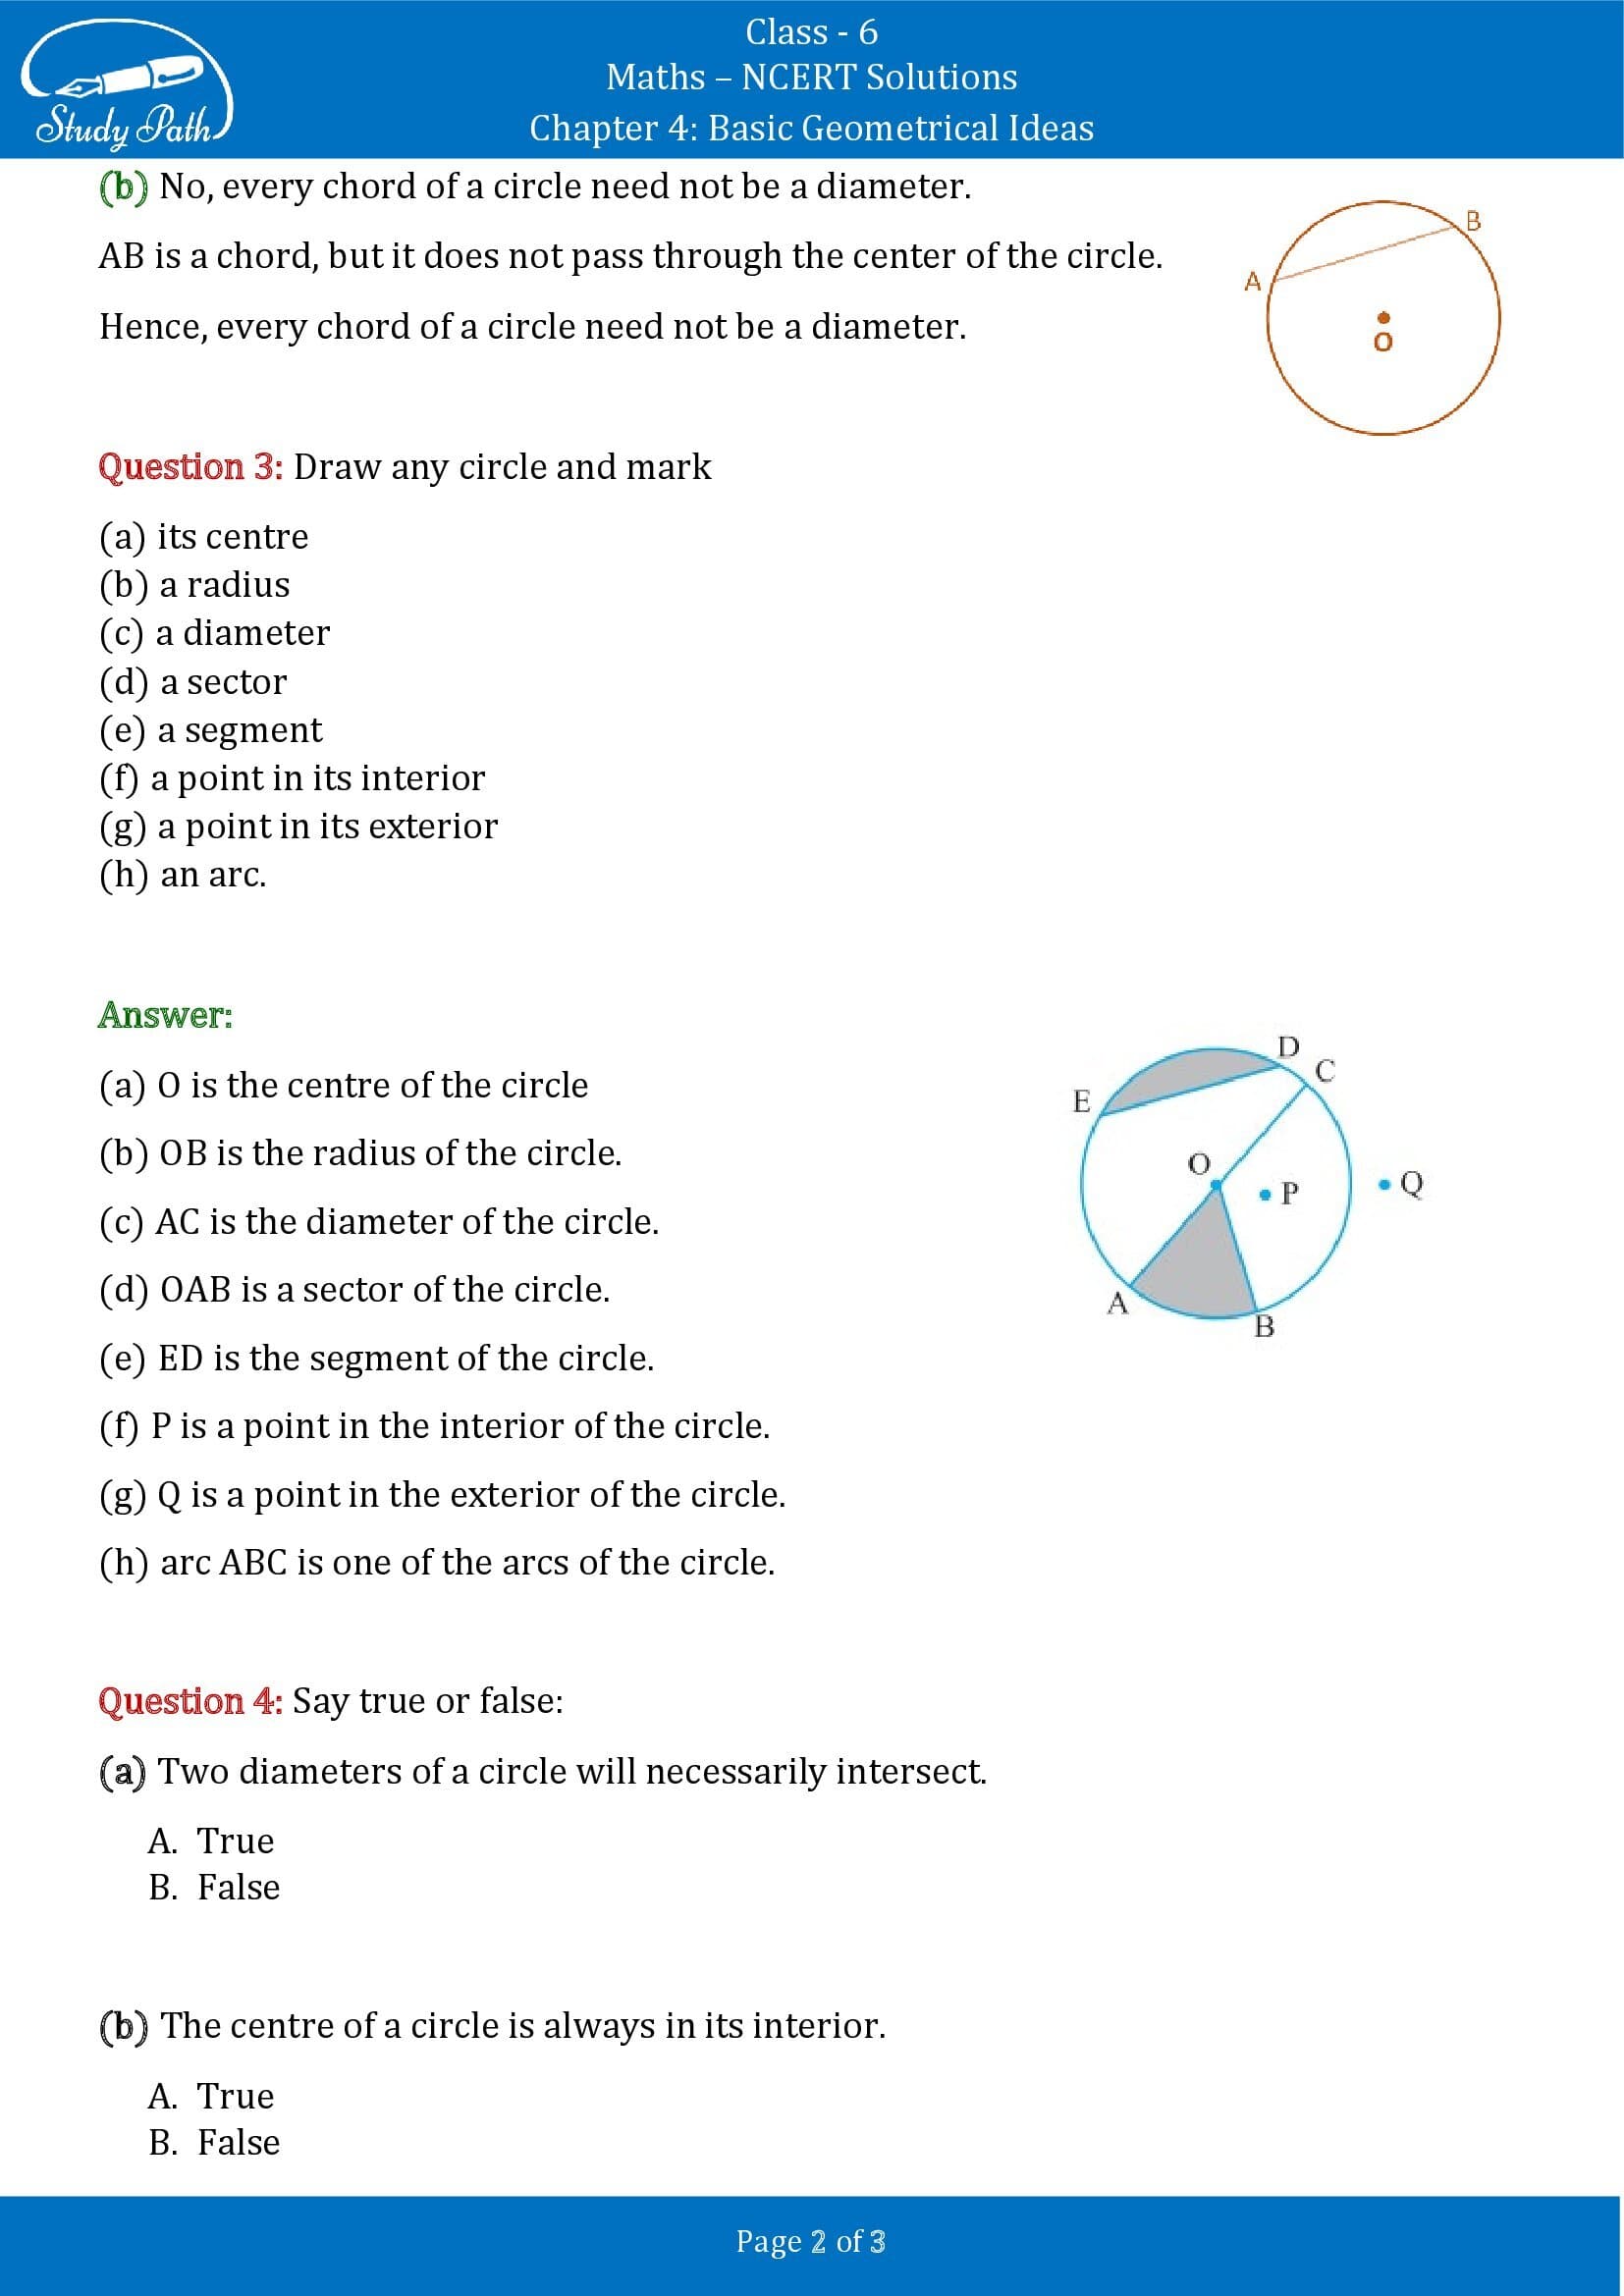 NCERT Solutions for Class 6 Maths Chapter 4 Basic Geometrical Ideas Exercise 4.6 00002